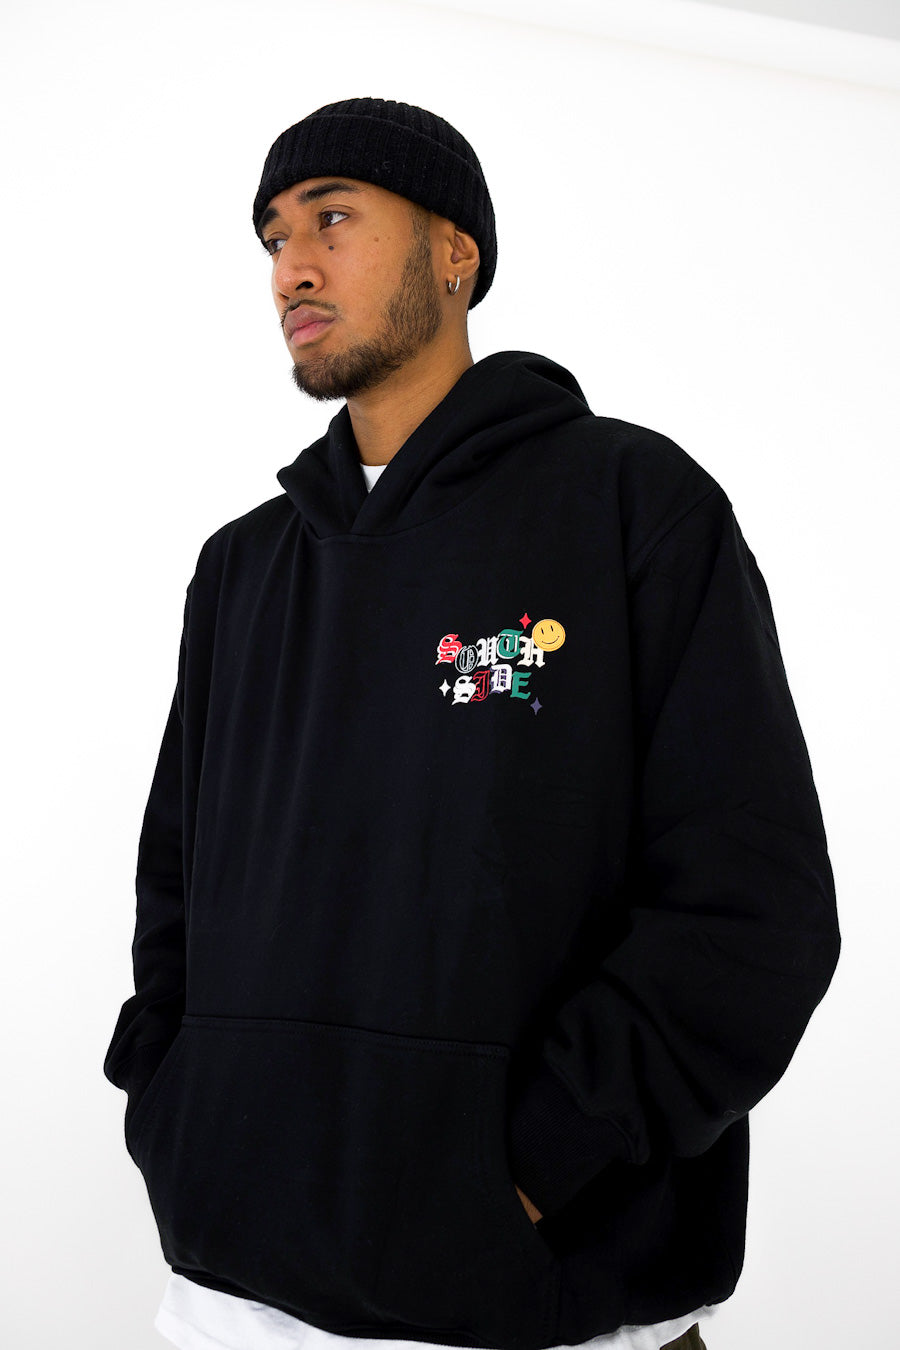 Southside - Nothin' But Happiness Hoodie (Black)